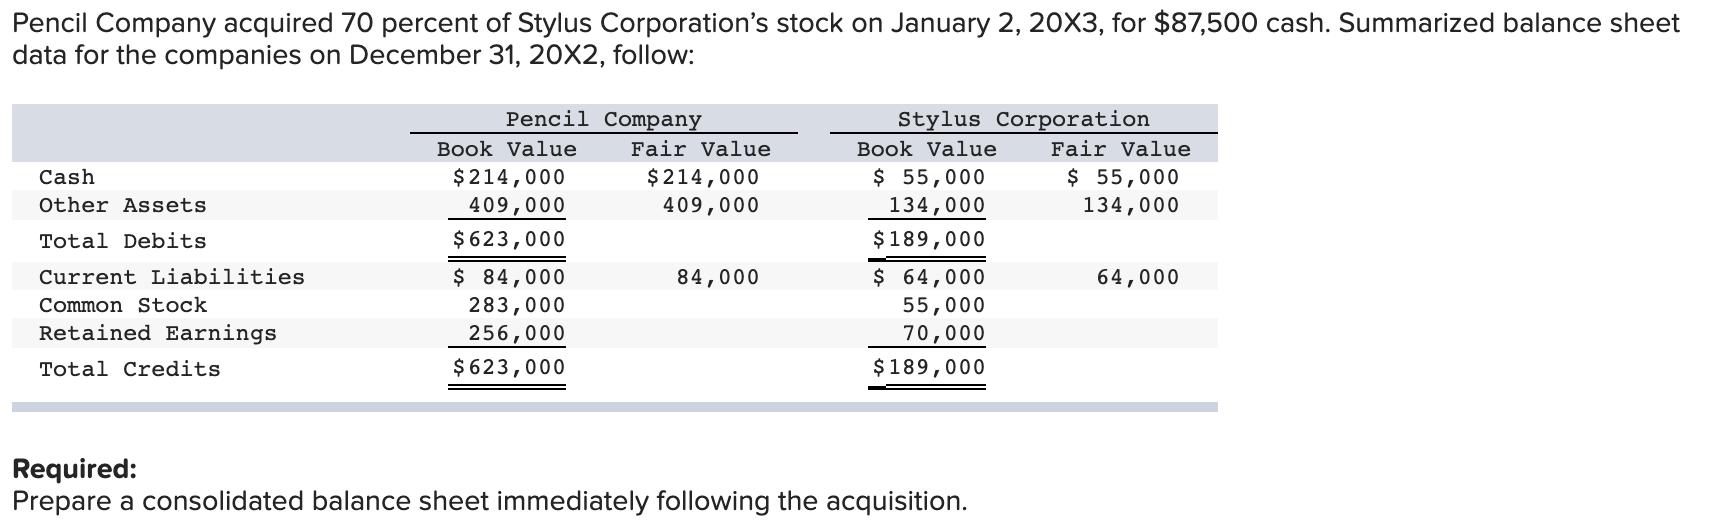 Pencil Company acquired 70 percent of Stylus Corporation's stock on January 2, 20X3, for $87,500 cash.